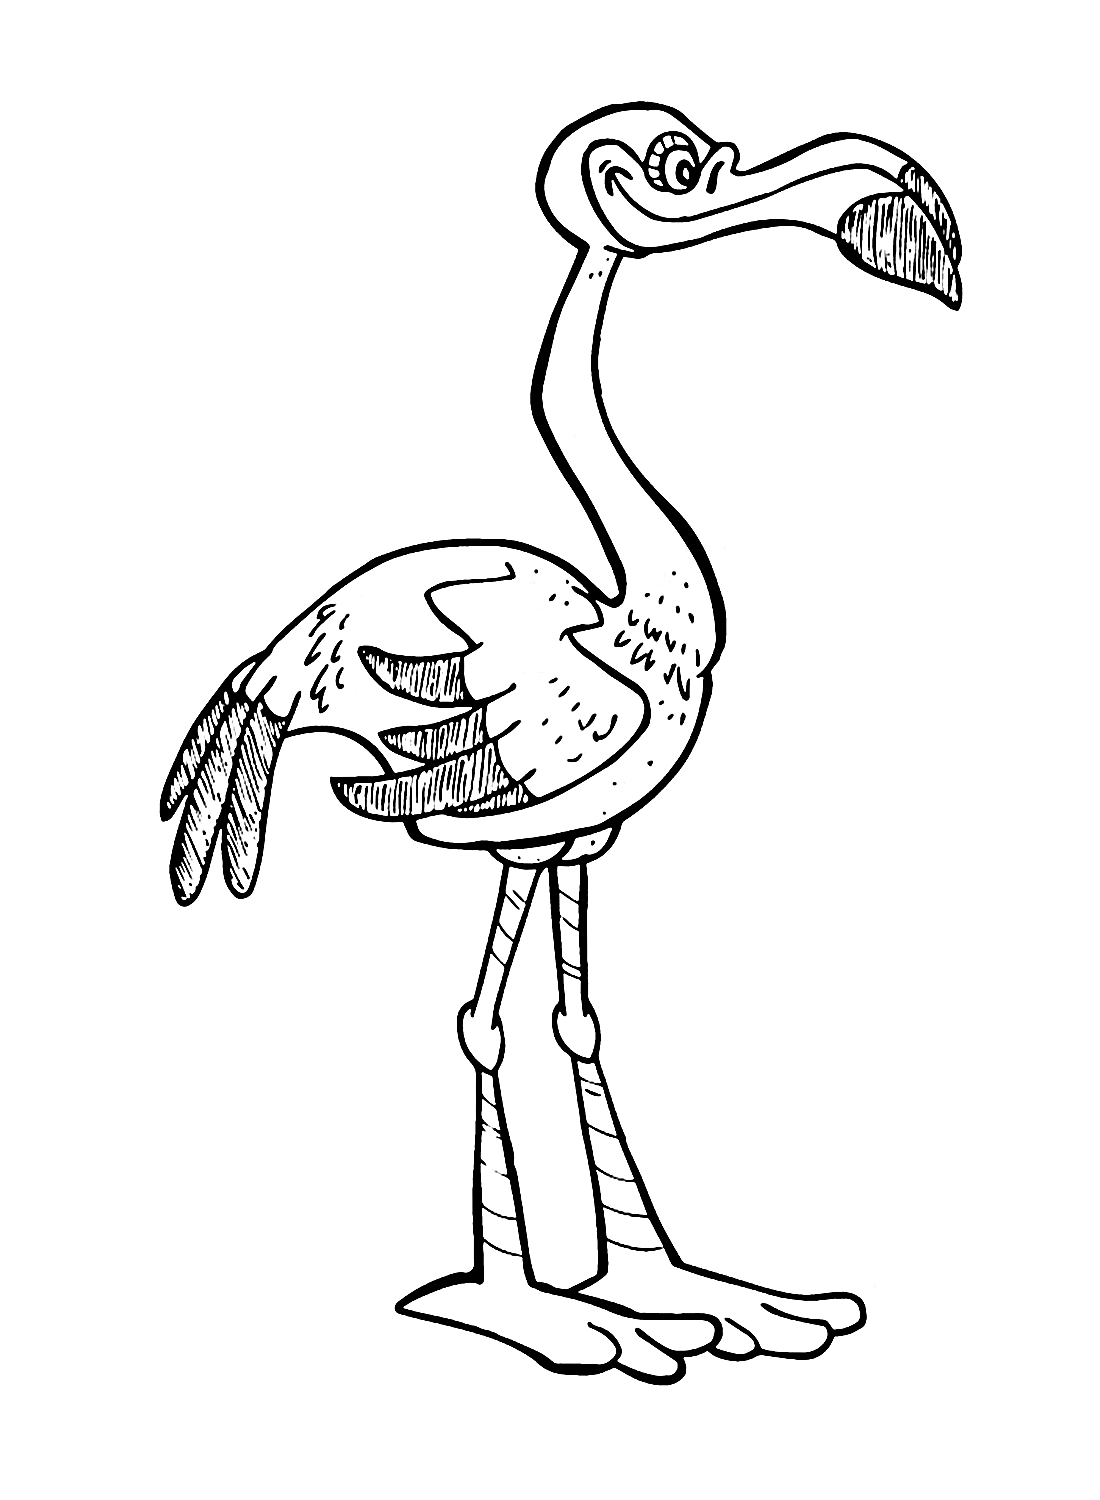 Lawn Flamingo Coloring Pages